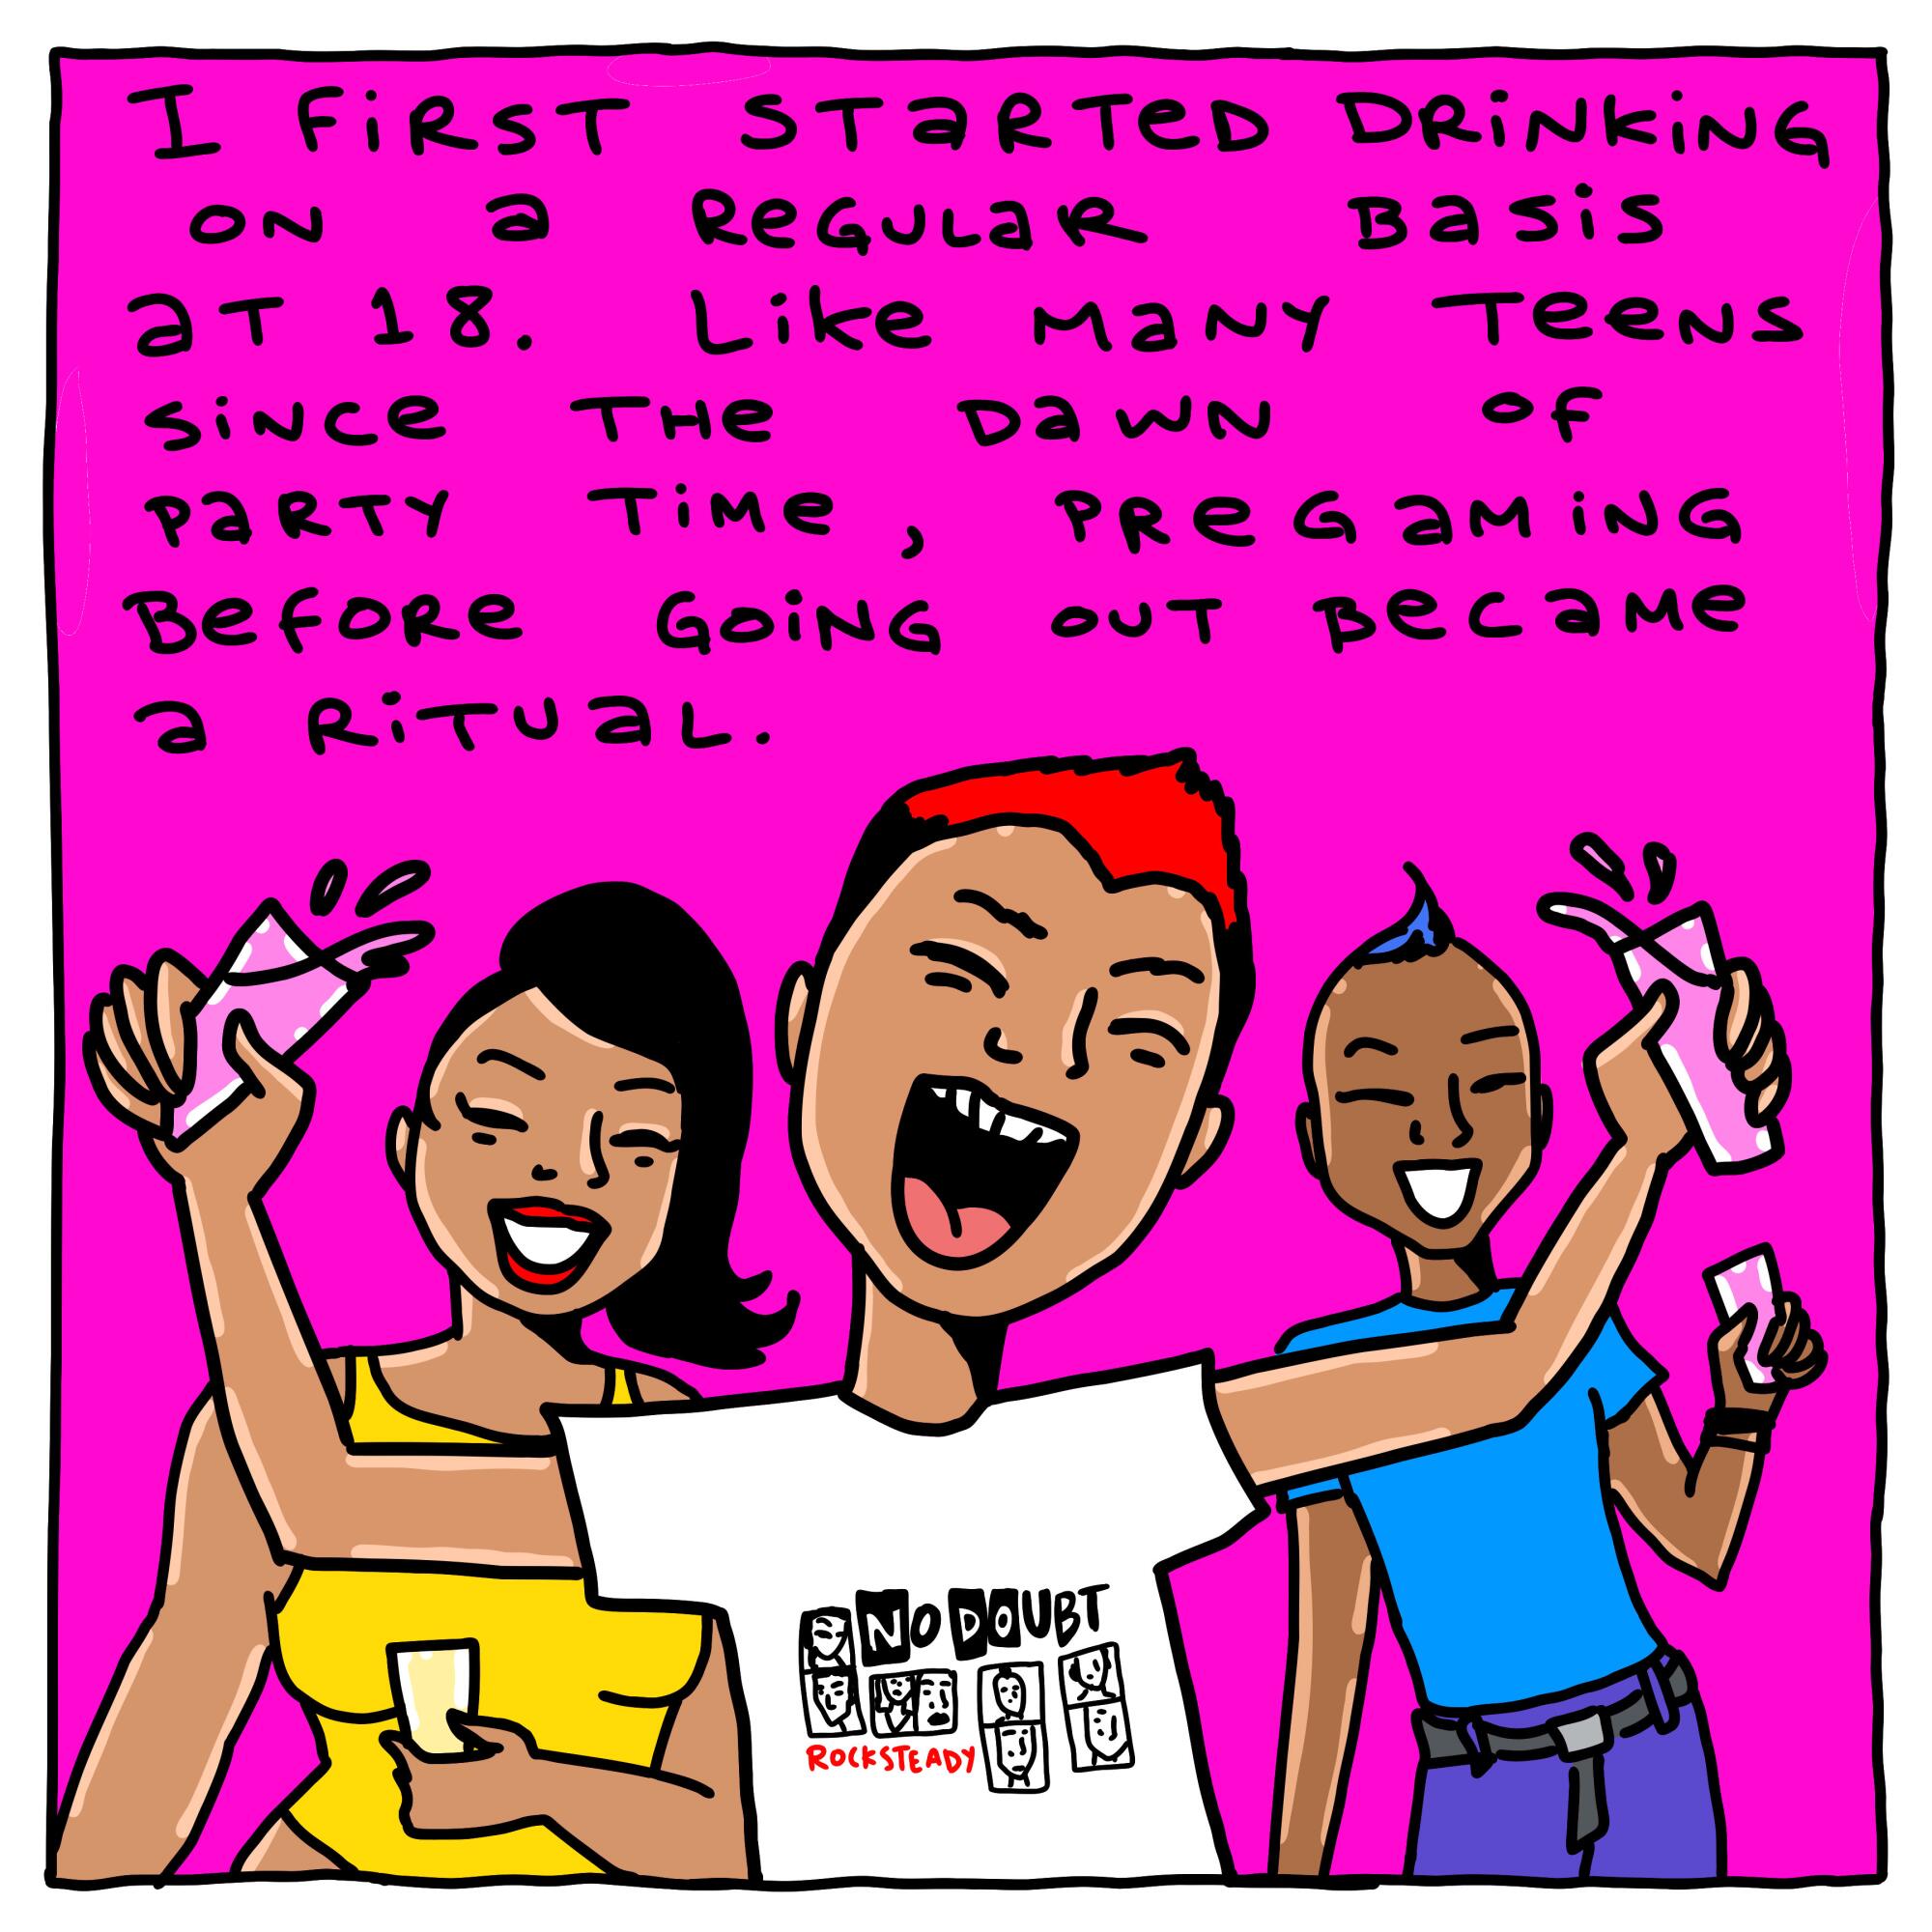 I first started drinking at 18. Like many teens, pregaming before going out became a ritual. 